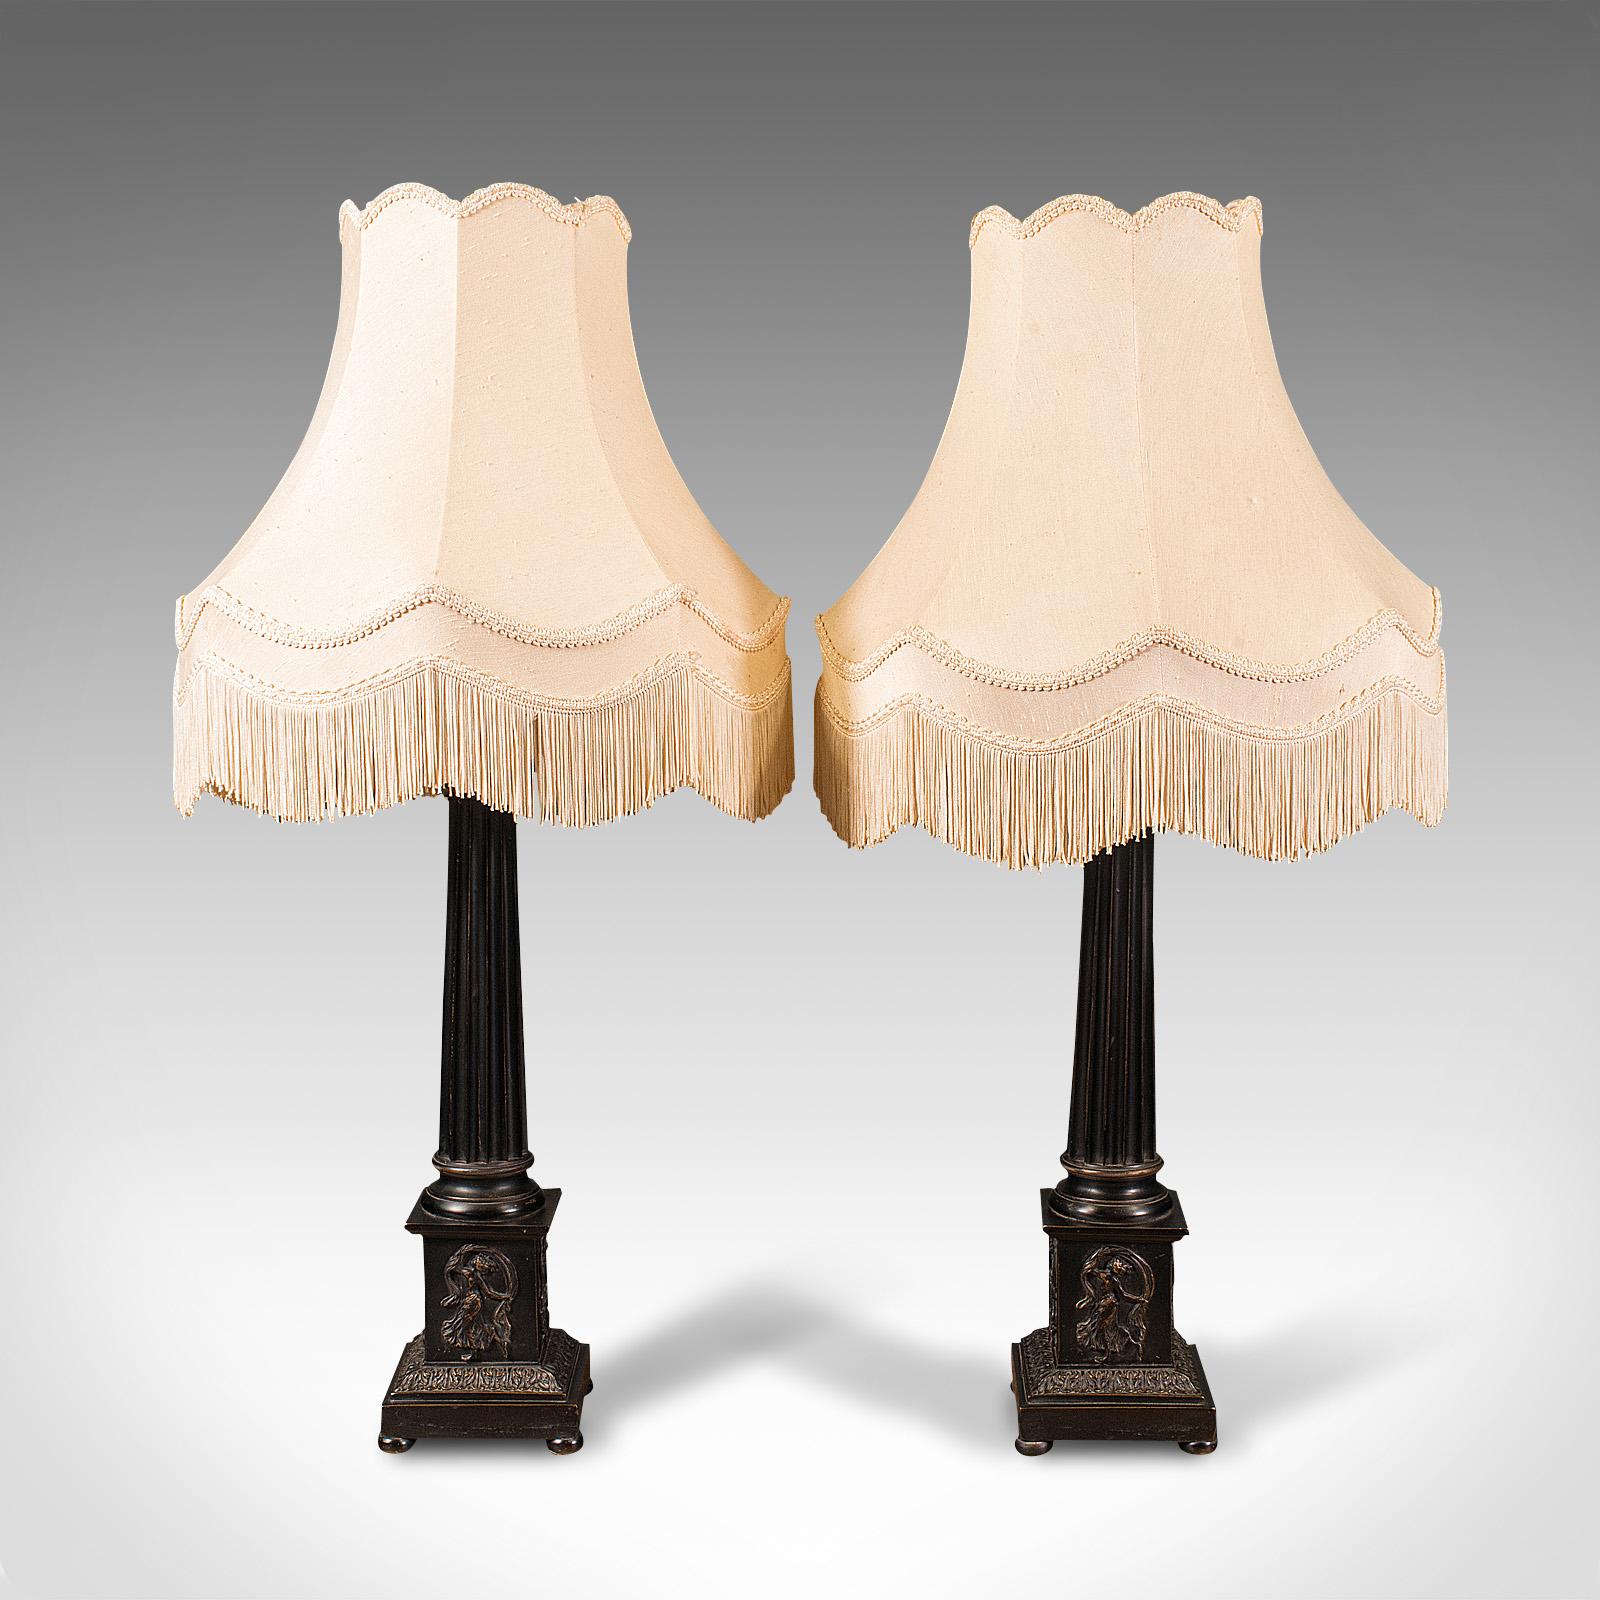 British Pair of Vintage Corinthian Lamps, English, Bronzed, Table Light, Classical Taste For Sale